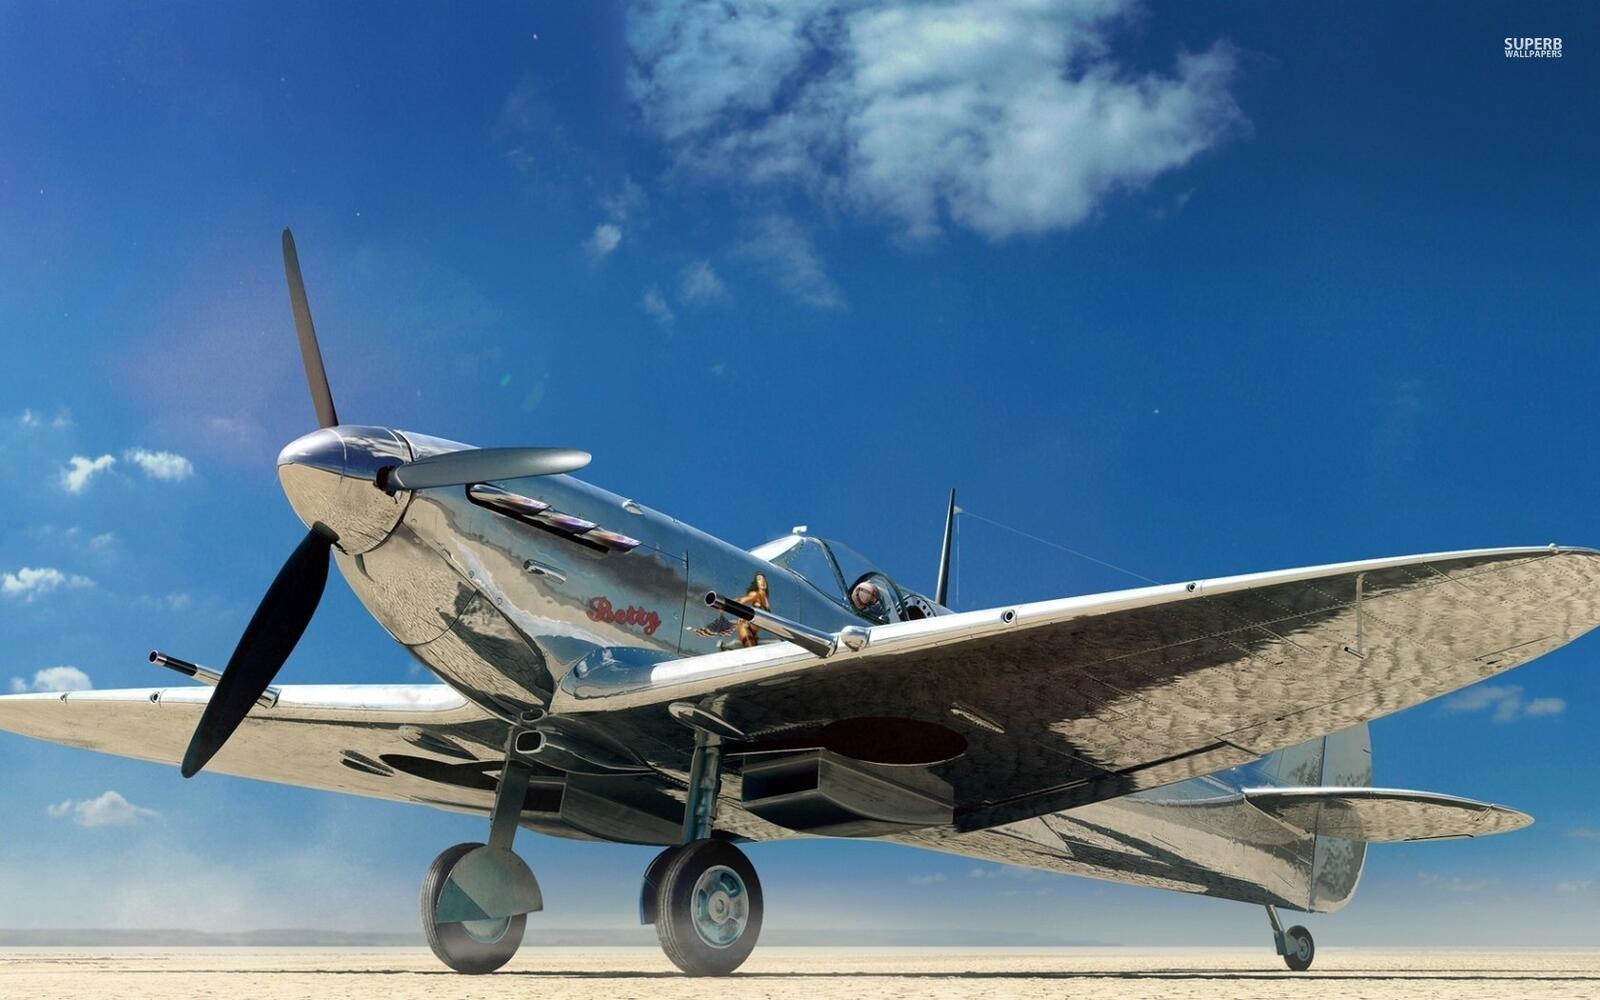 Wallpapers supermarine spitfire chrome airplane on the desktop